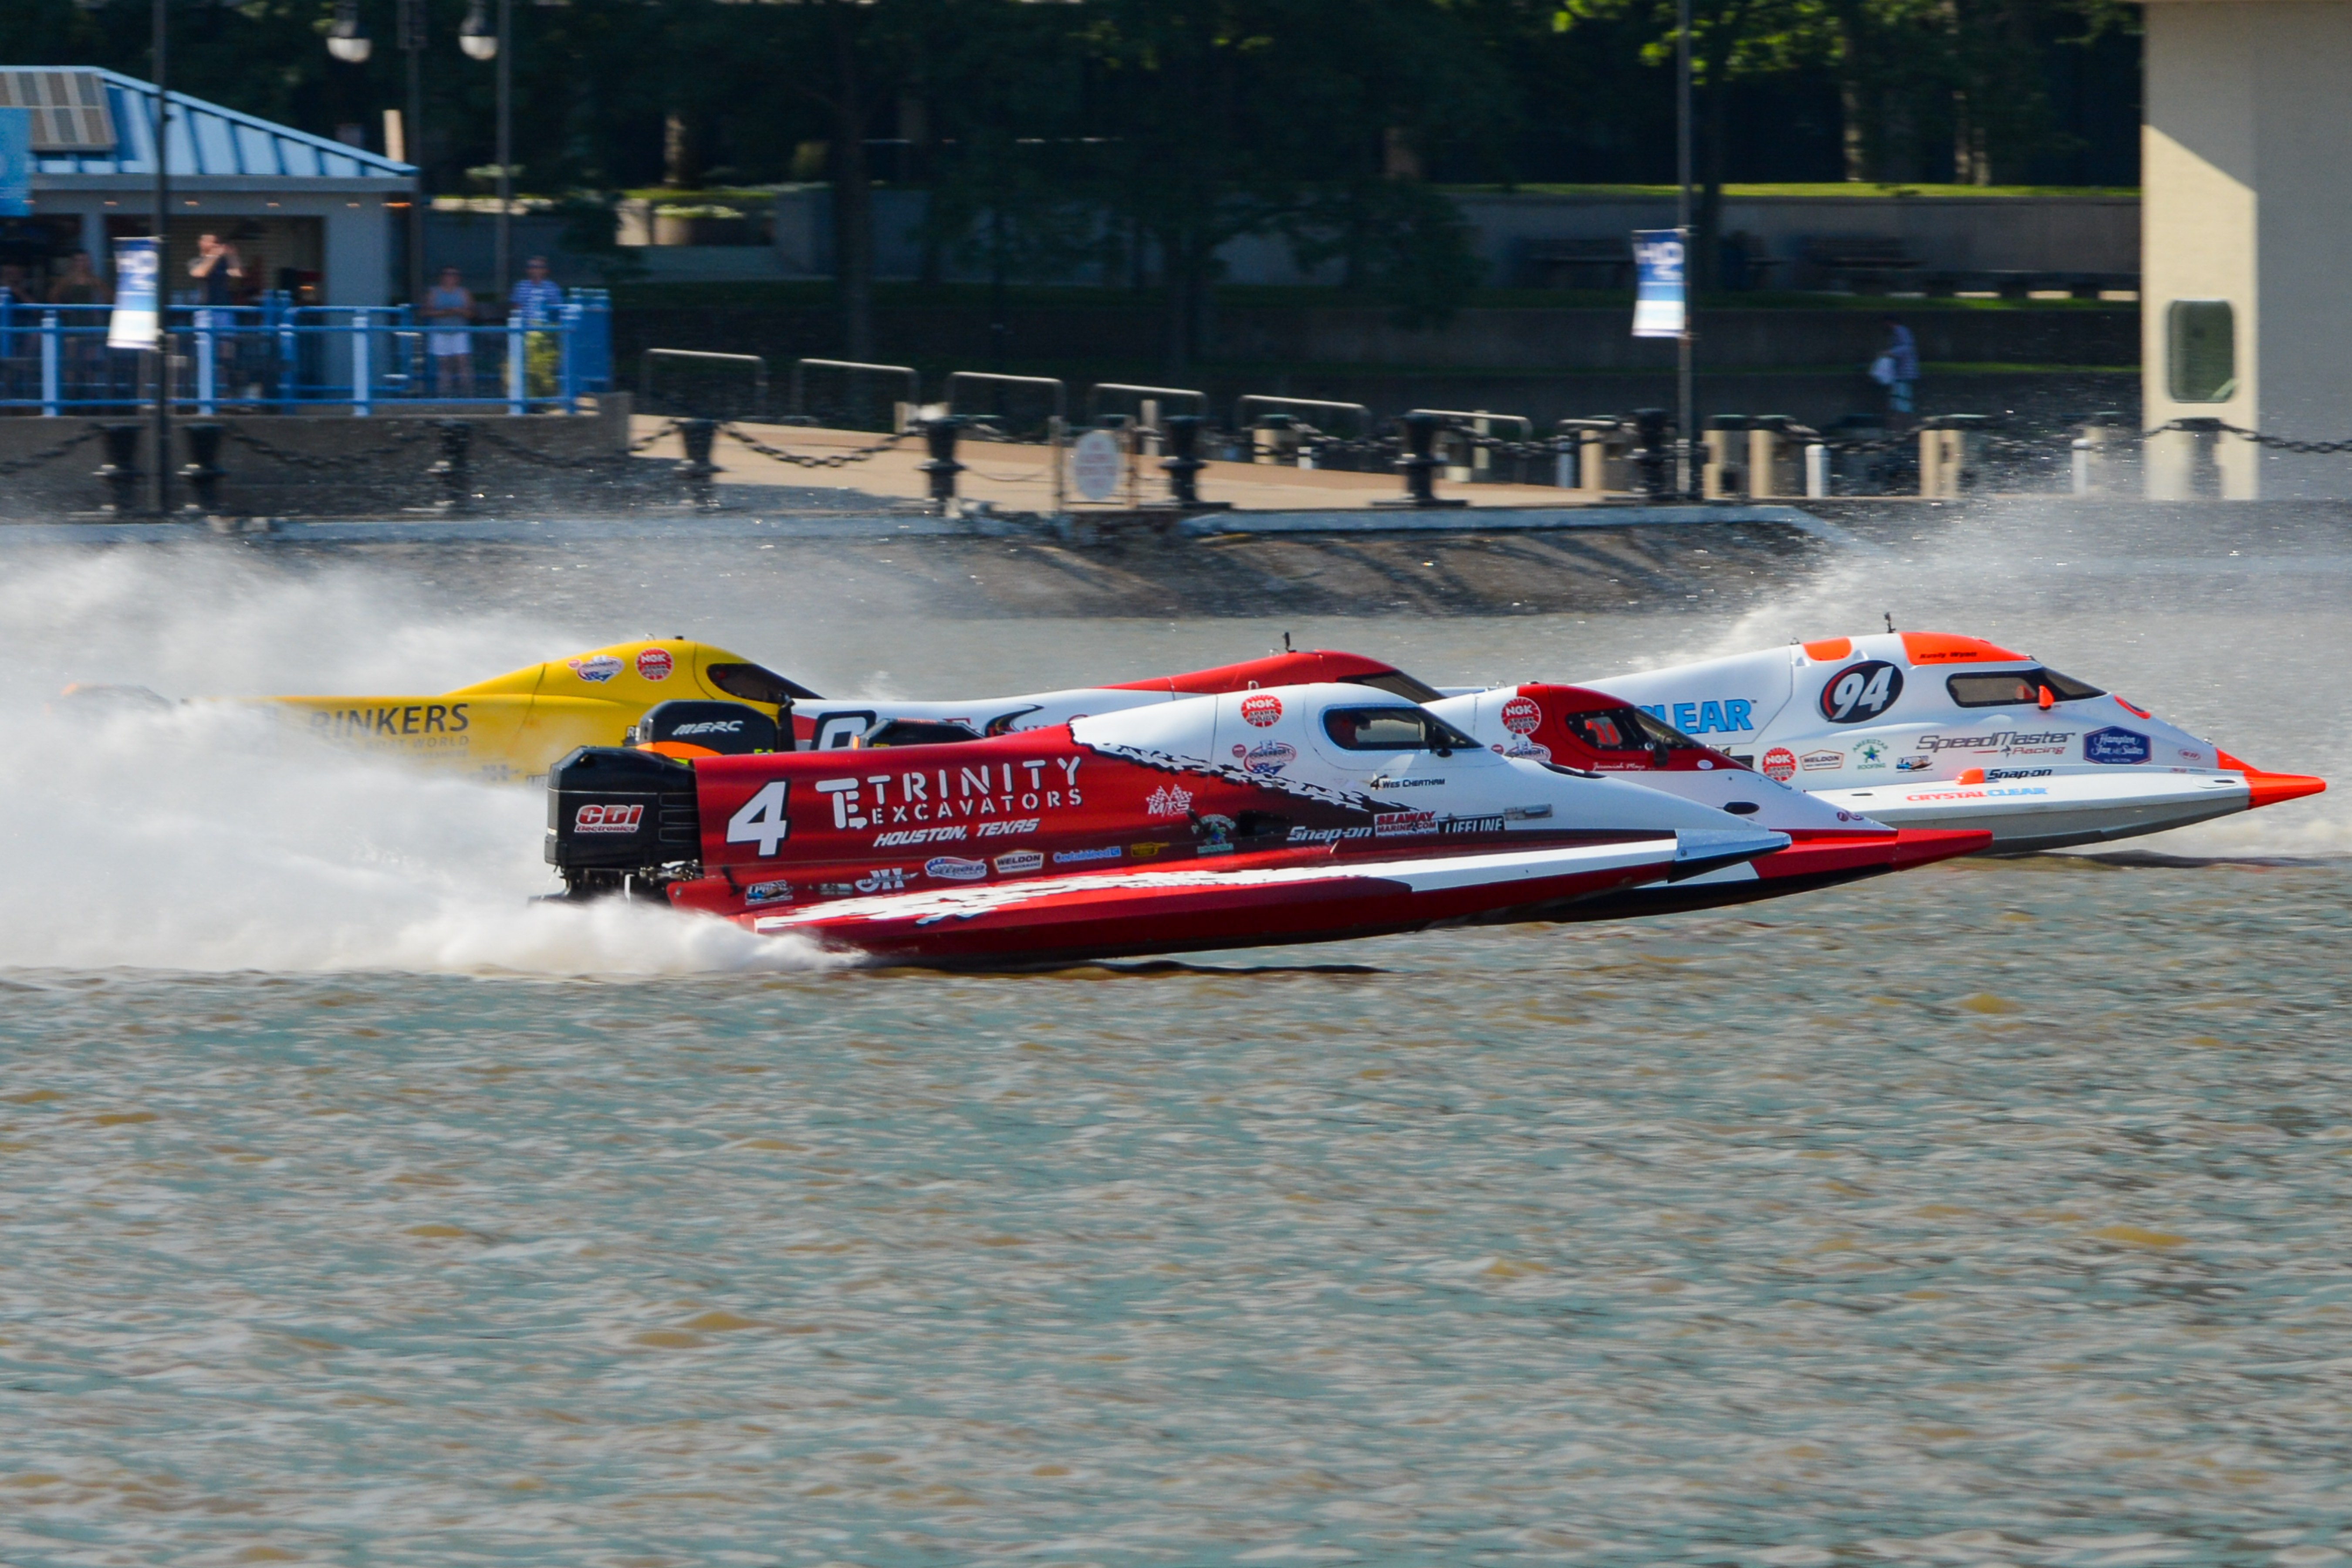 a powerboat racing